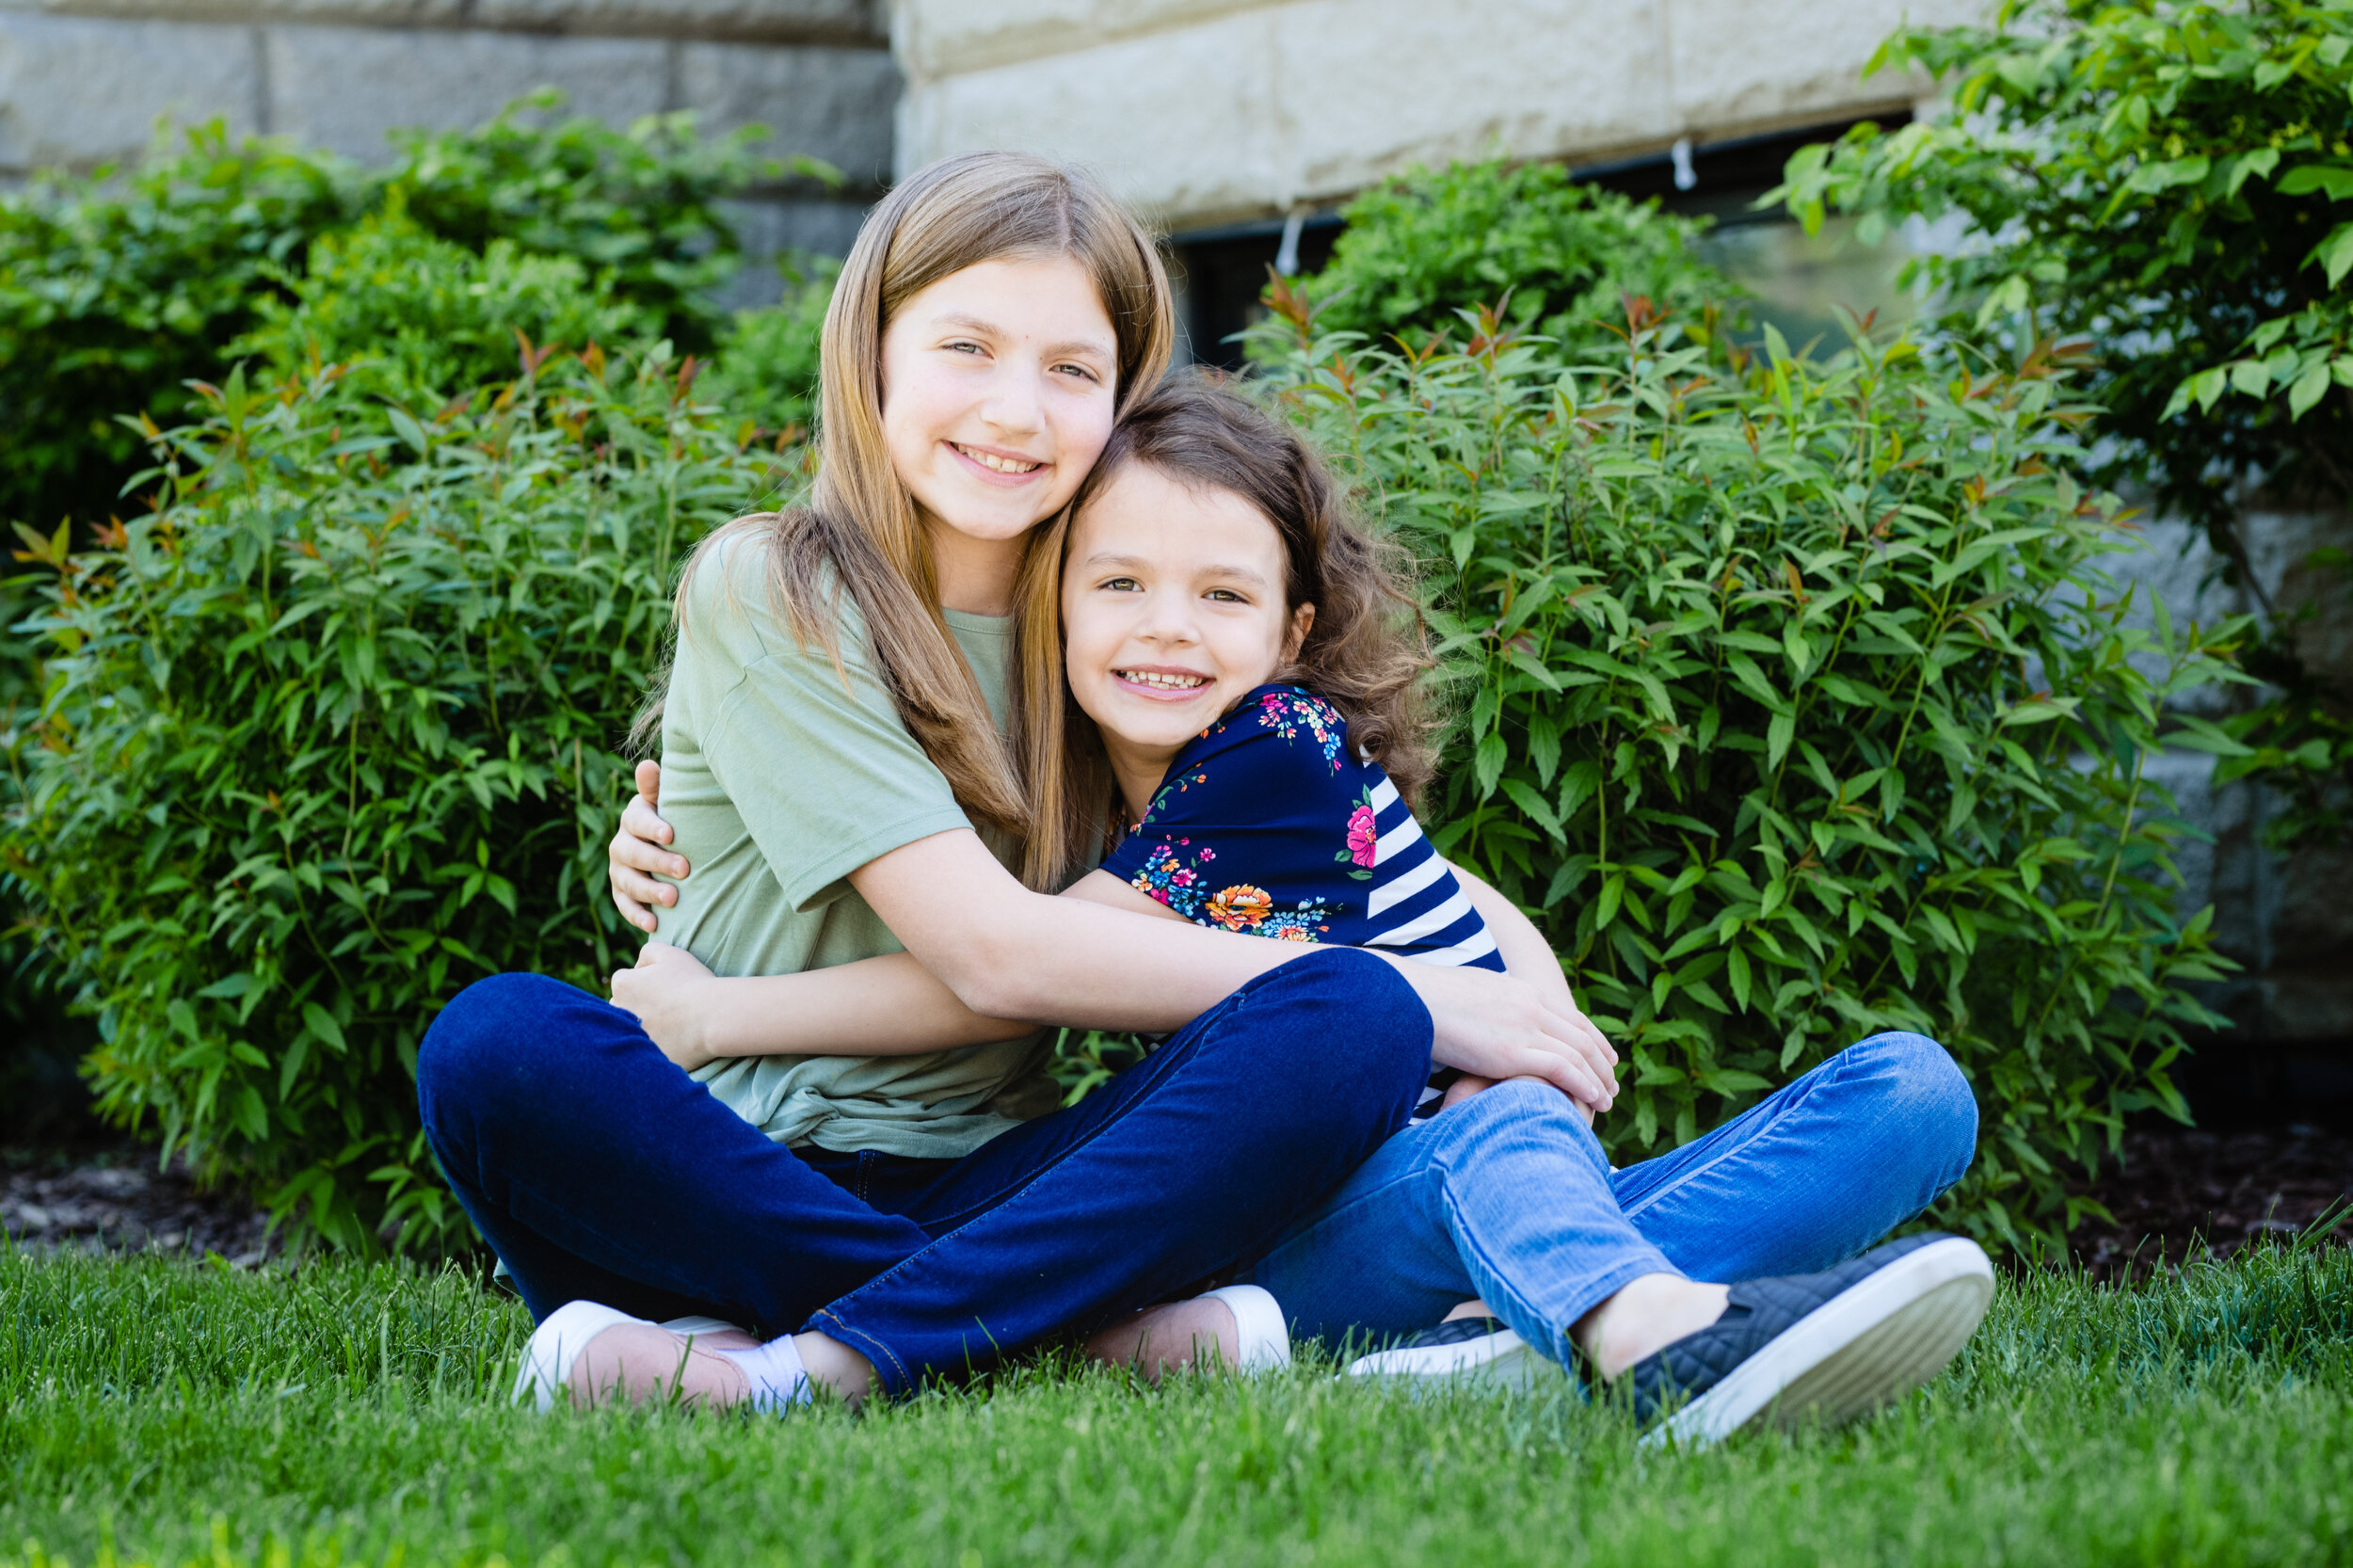 Candid photo of daughters: family portrait session photographed by J. Brown Photography.